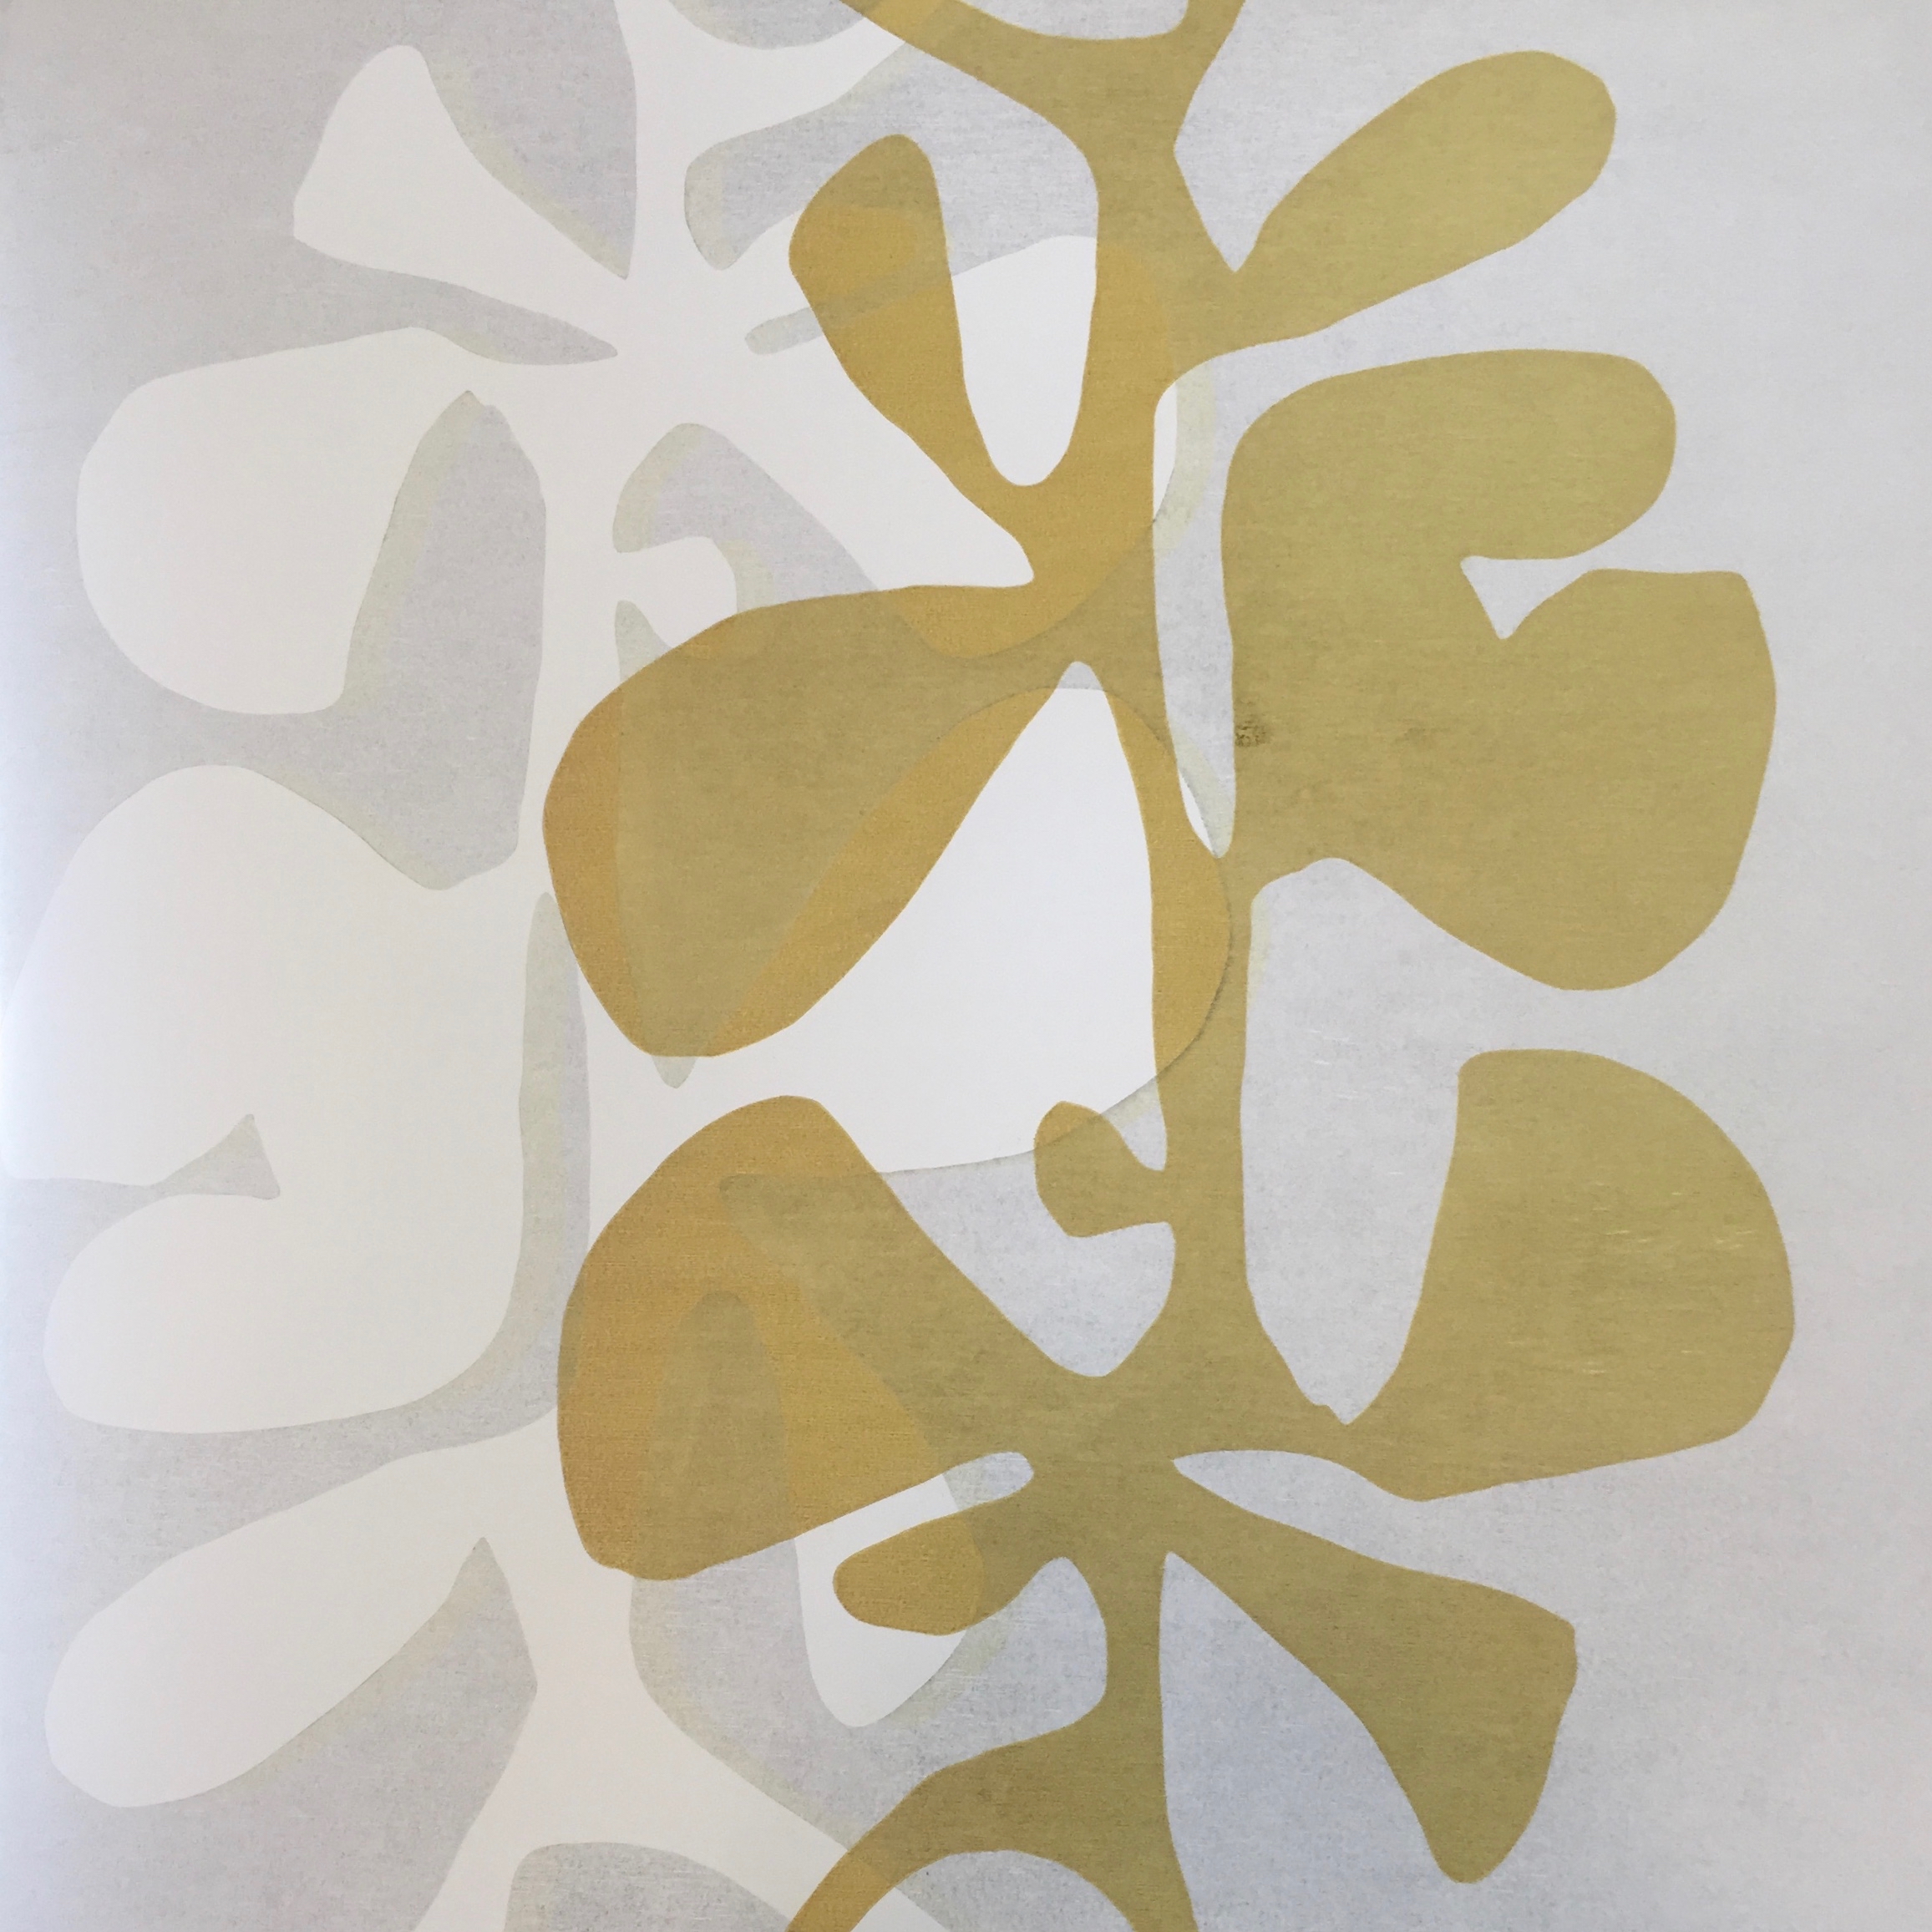 Bauhaus Botanical - Pale Grey/Gold/White: created by Monica Monaghan-Milstein for MonicaArts Design LLC